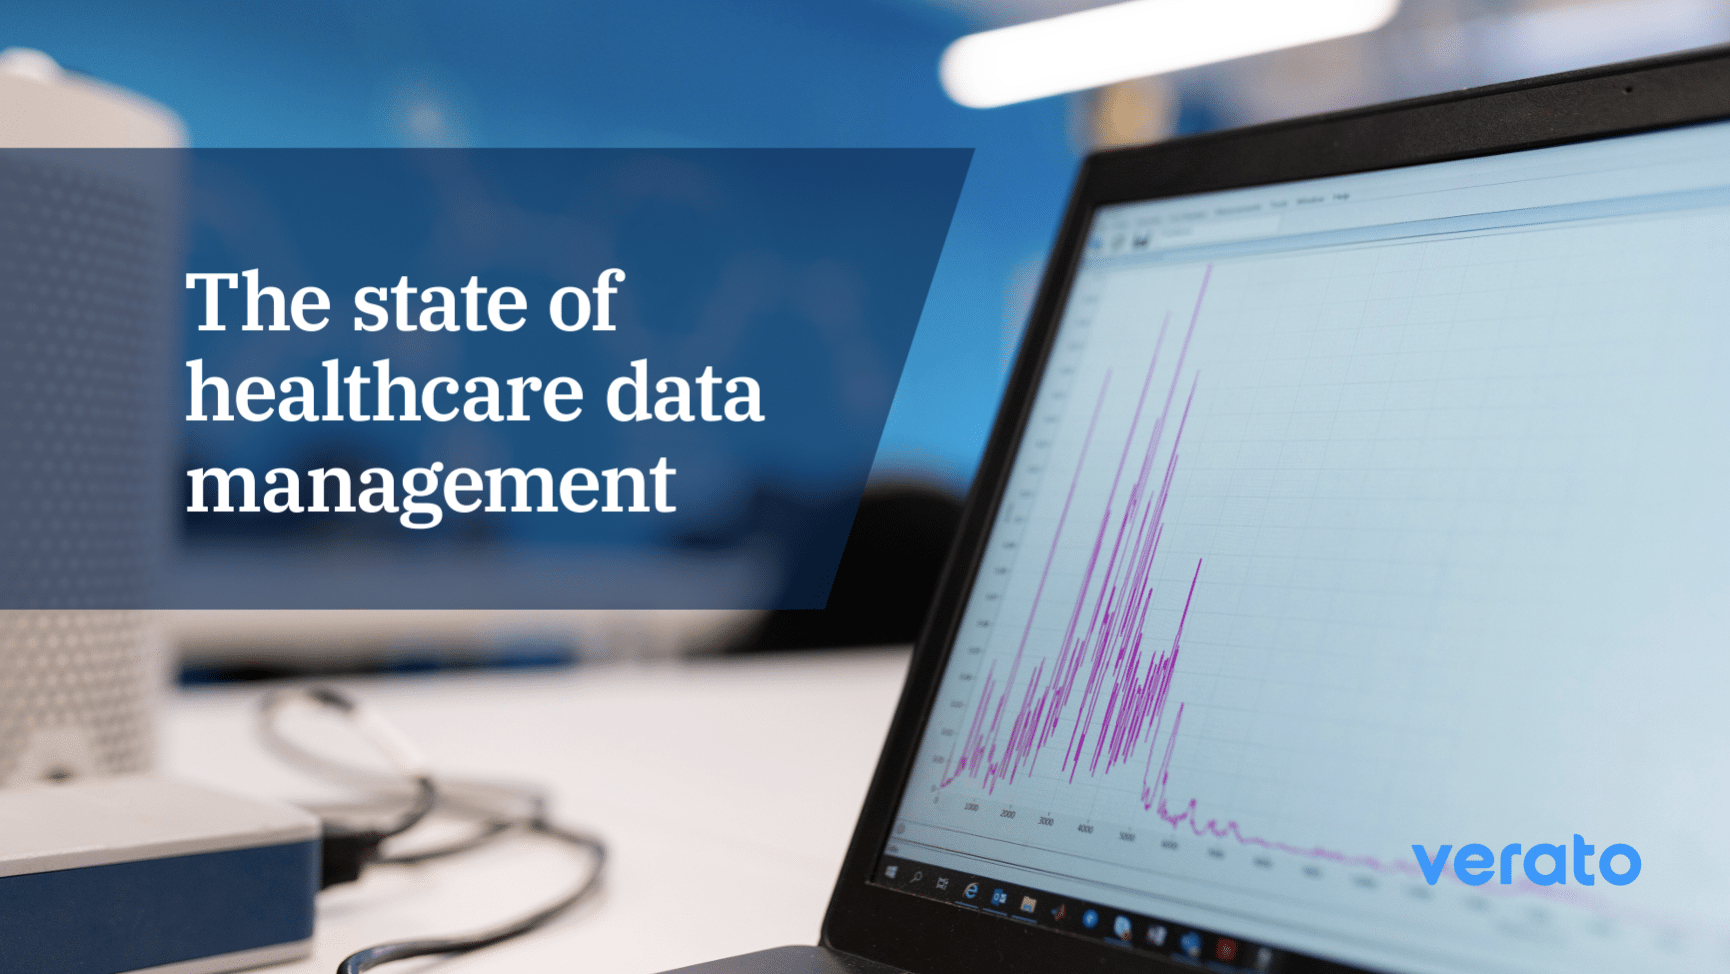 The state of healthcare data management